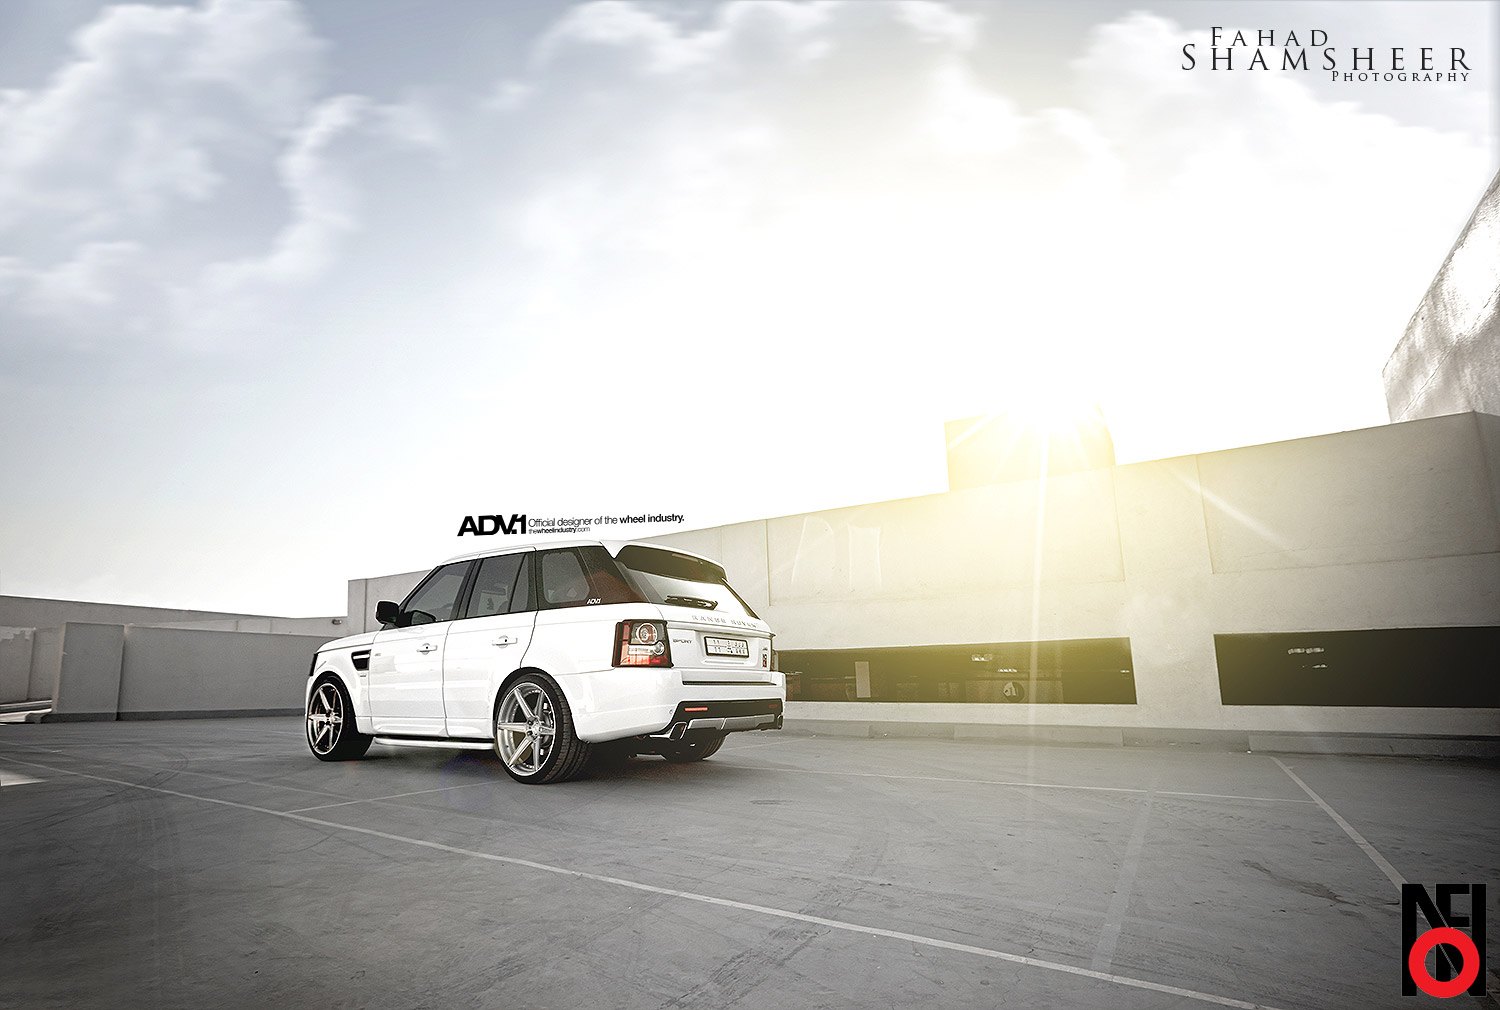 Aftermarket Roofline Spoiler on White Range Rover Sport - Photo by ADV.1